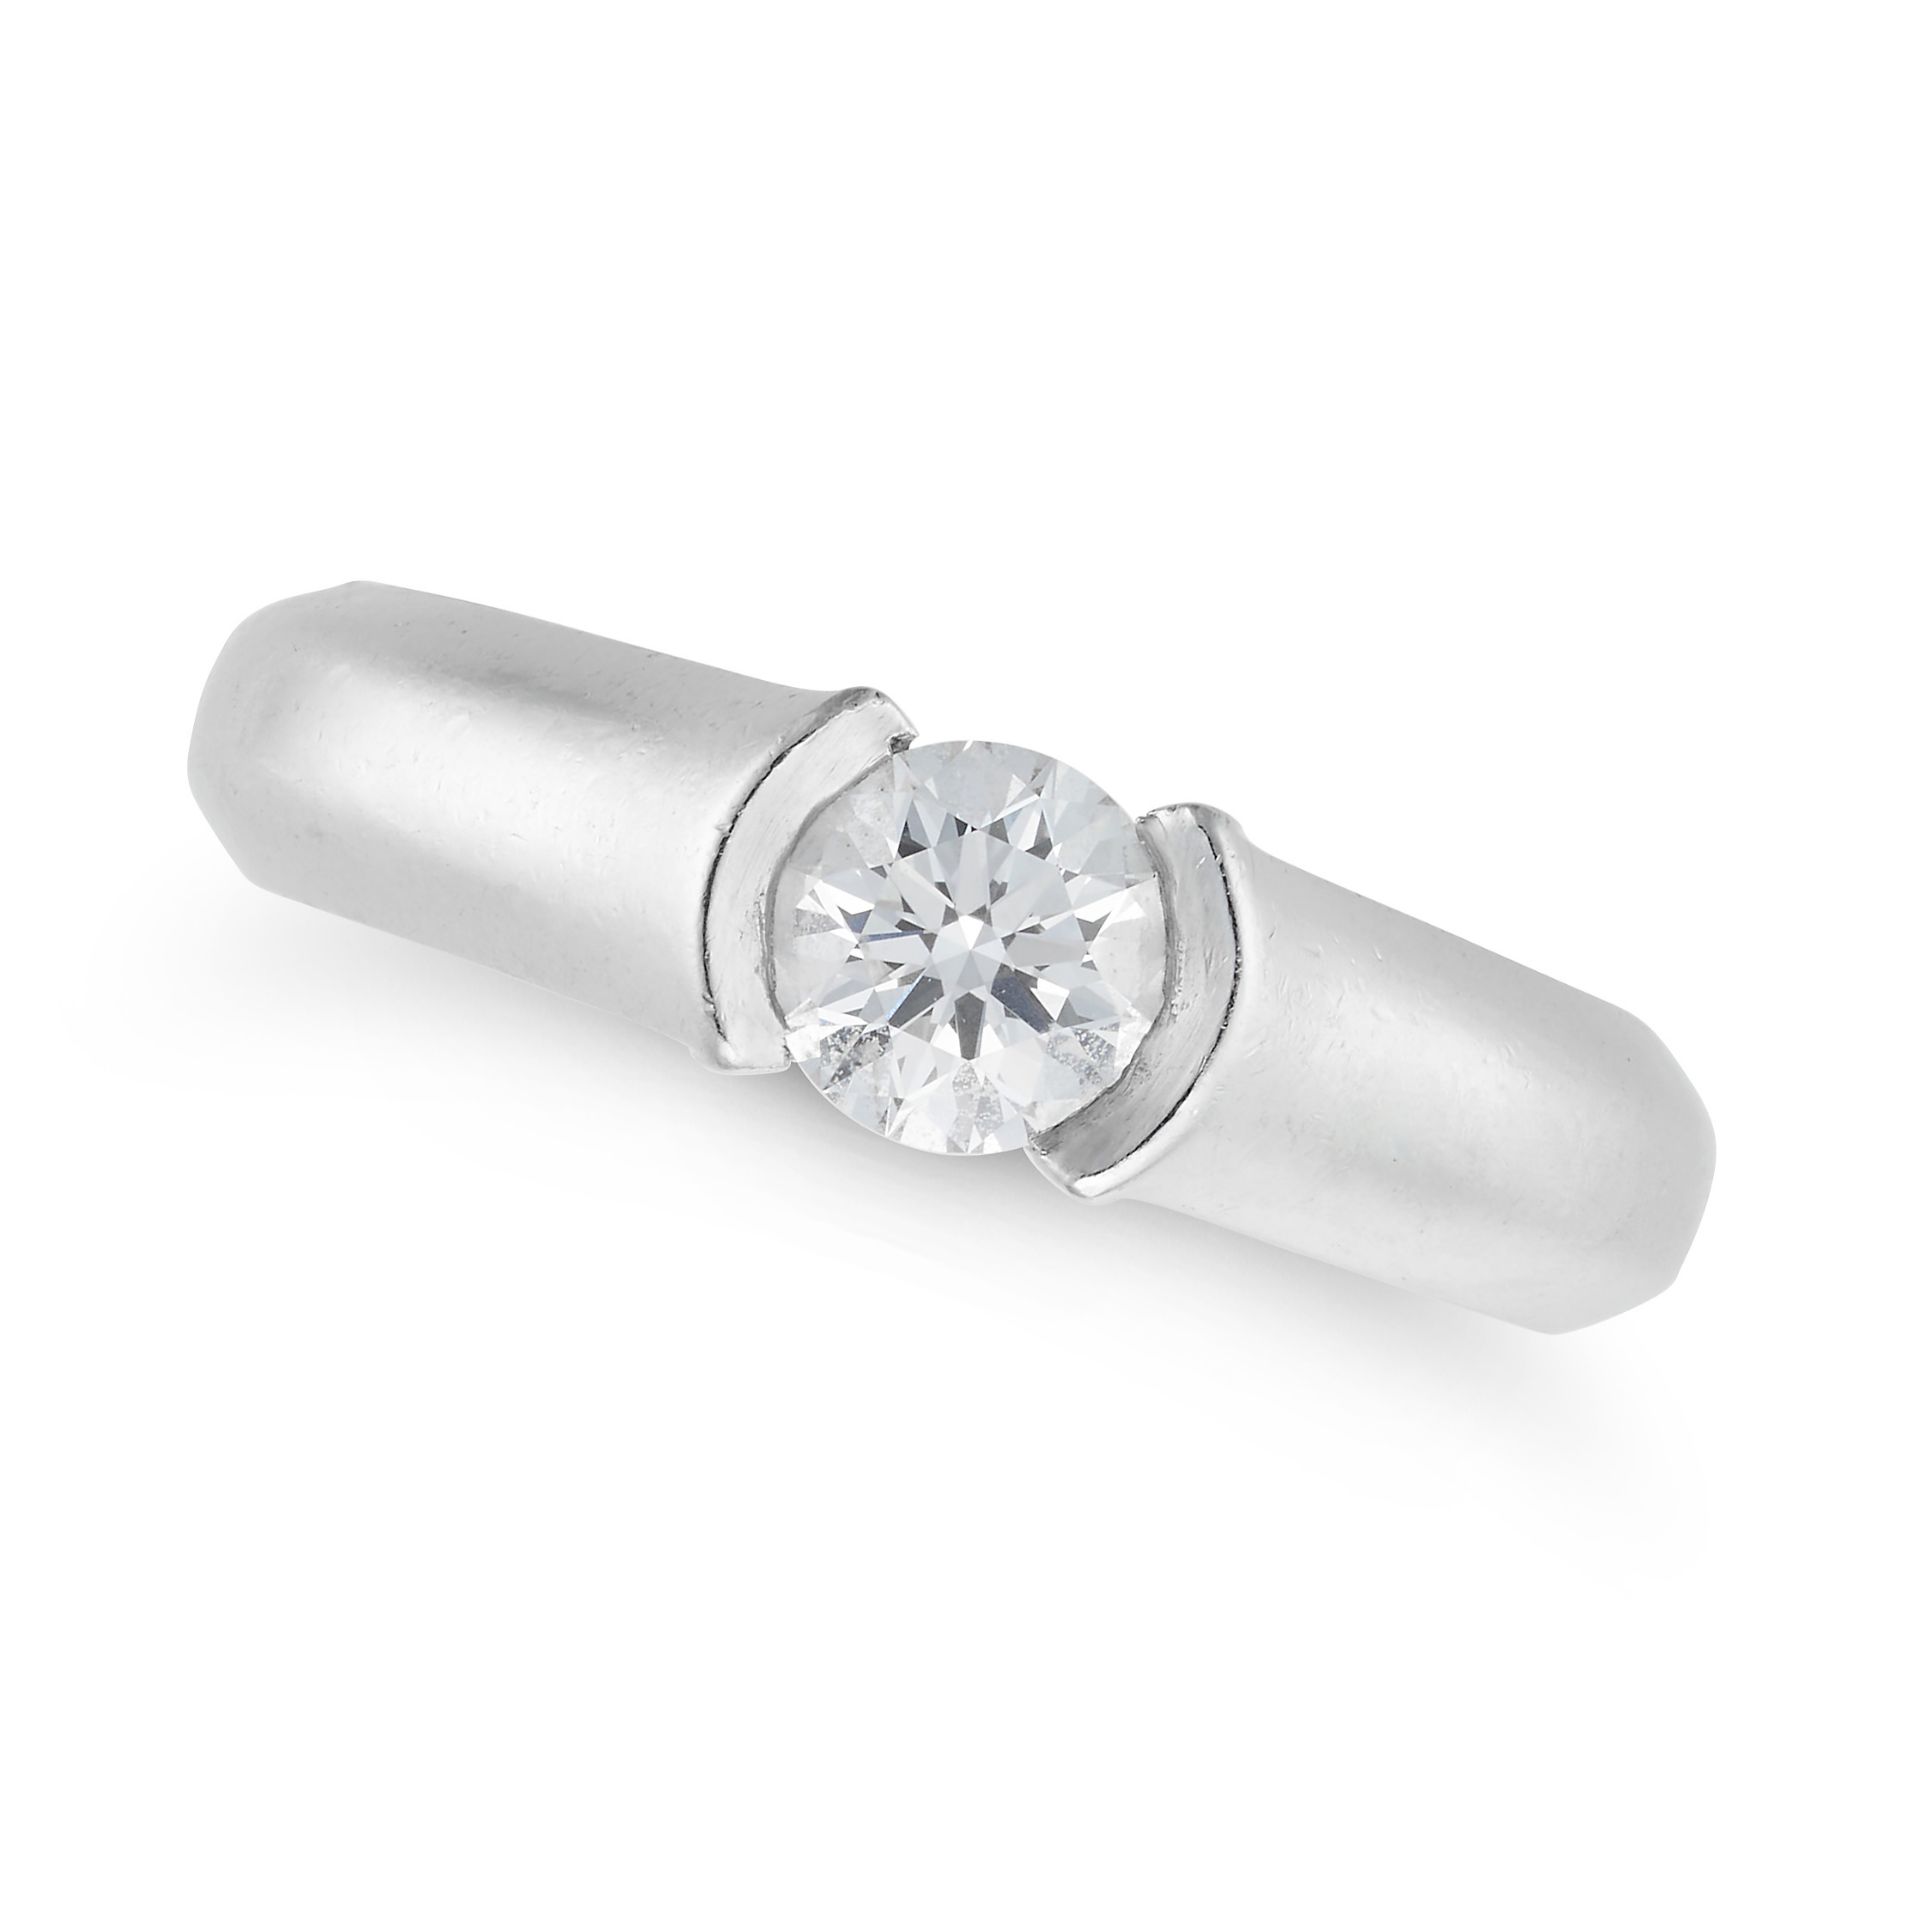 CARTIER, A SOLITAIRE DIAMOND RING in platinum, set with a round brilliant cut diamond of 0.50 car...